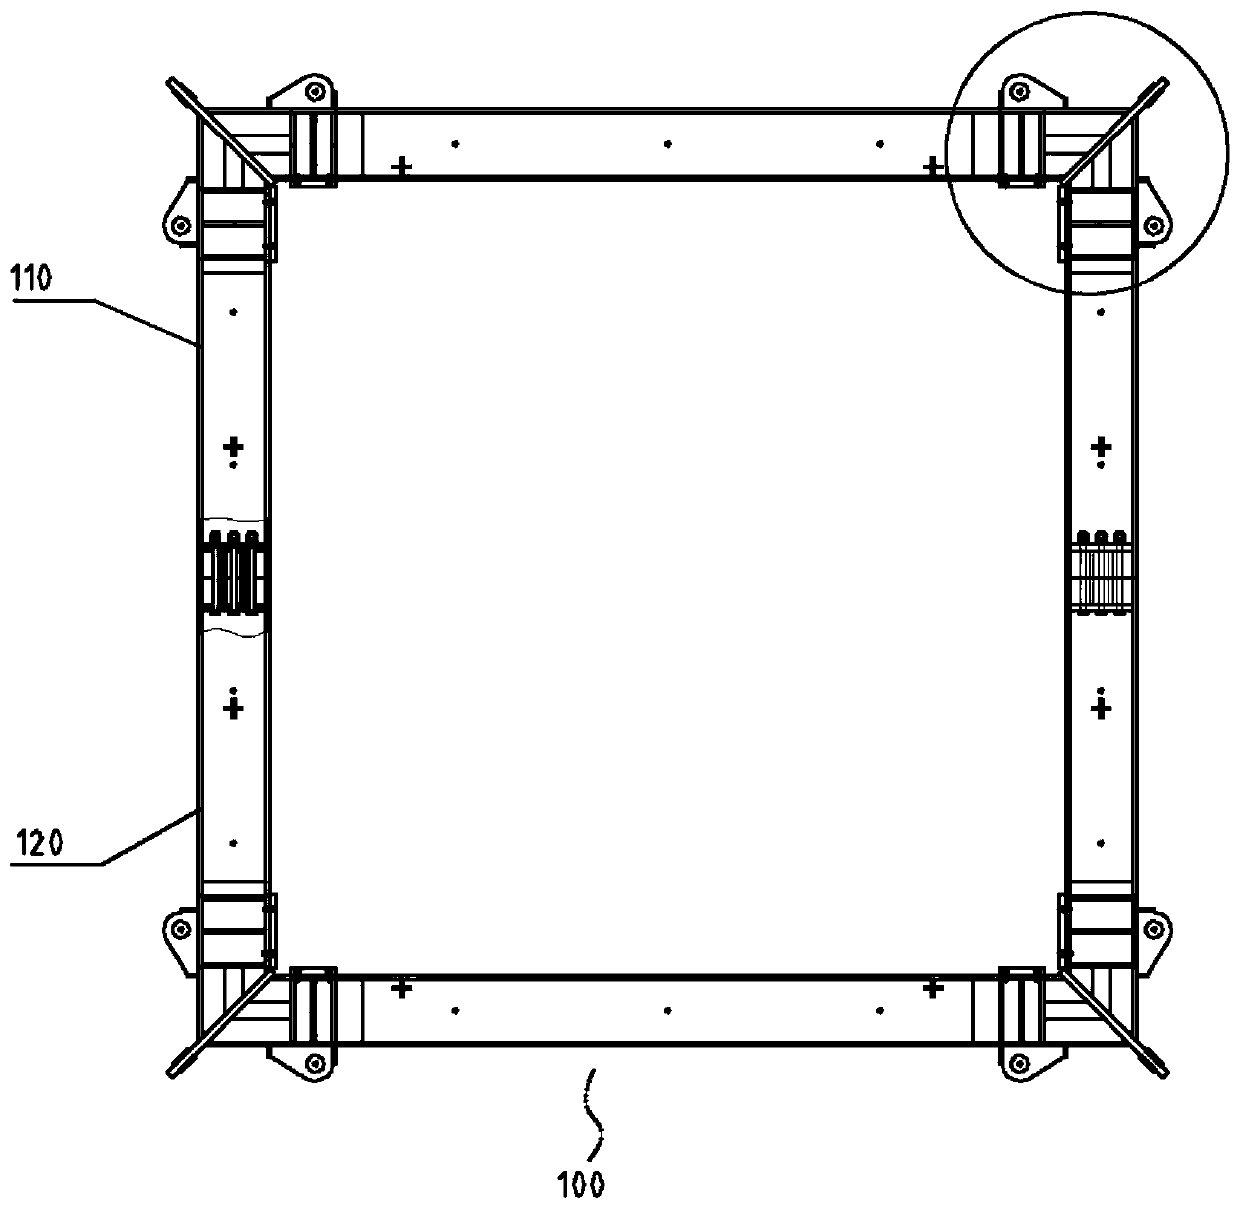 Girdle ring device with friction sheets